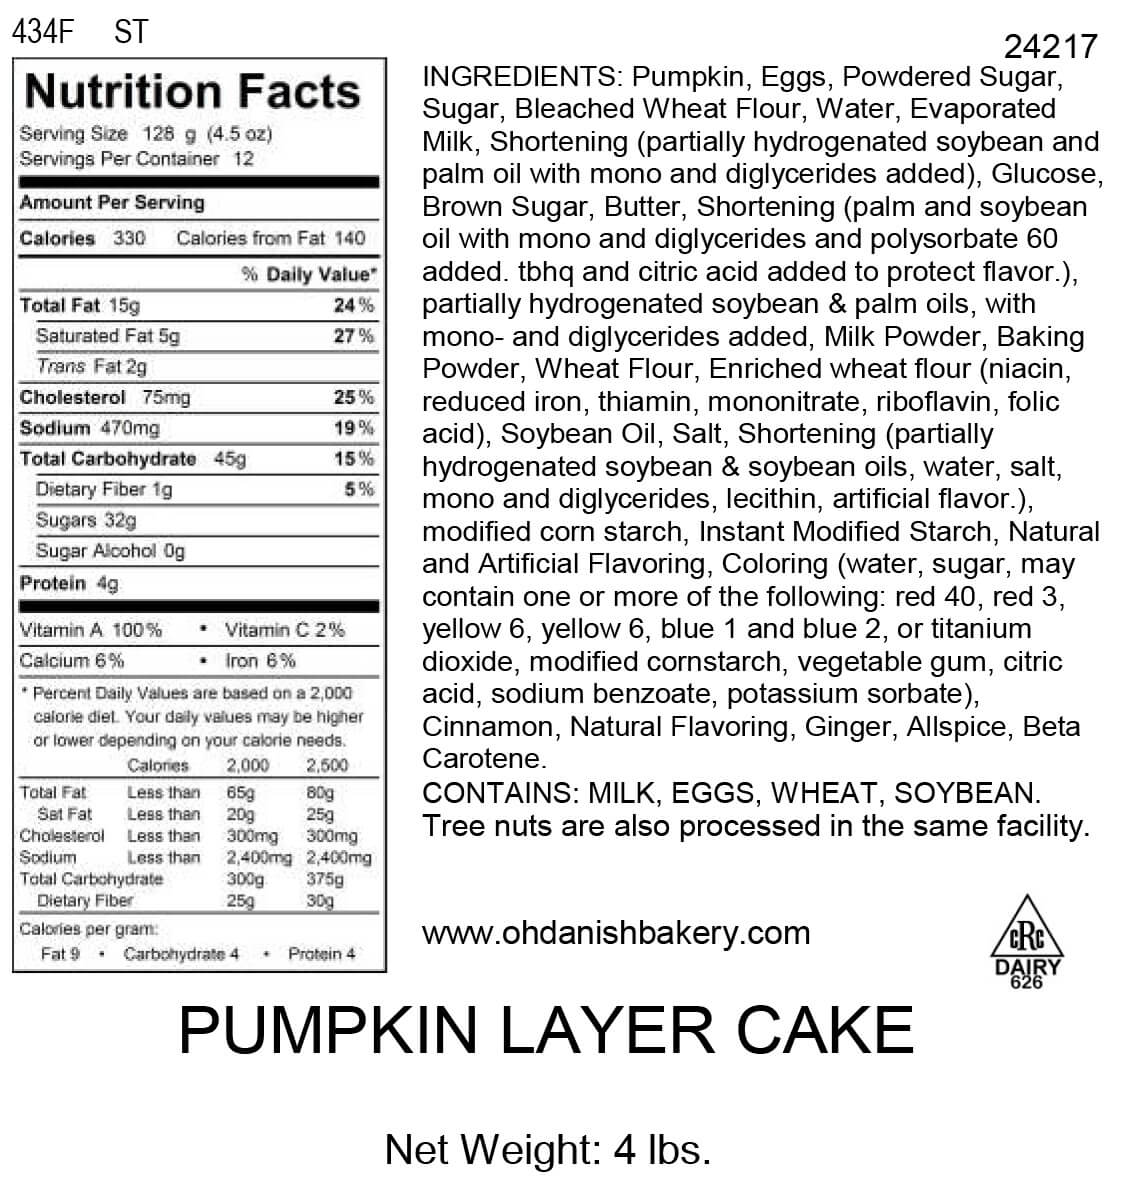 Nutritional Label for Pumpkin Layer Cake